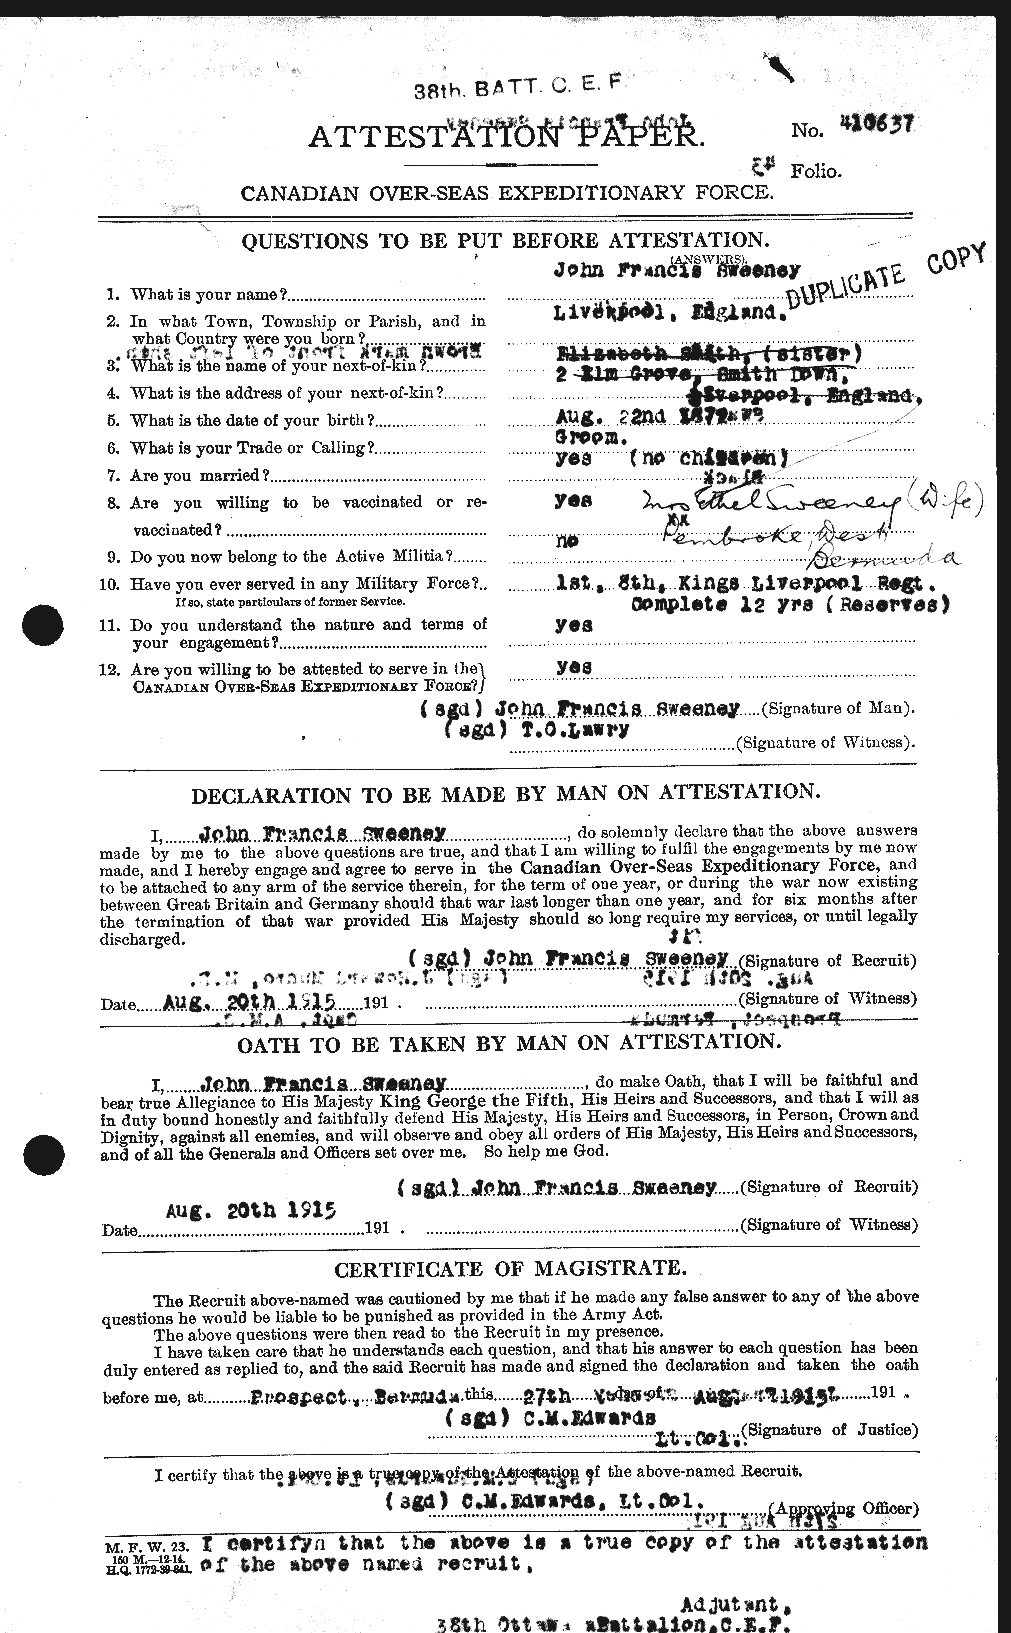 Personnel Records of the First World War - CEF 129731a